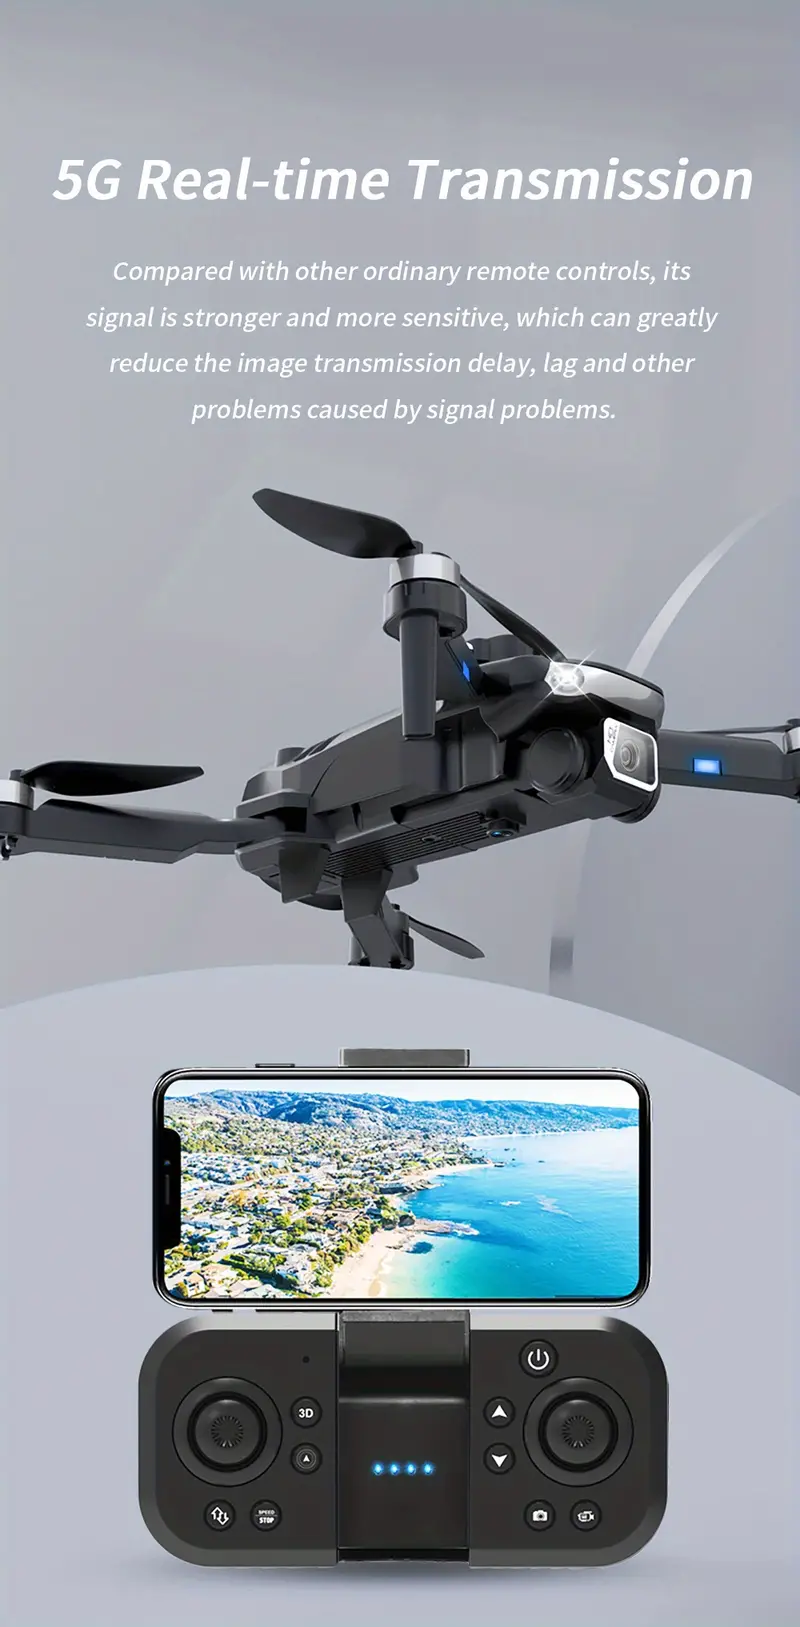 hd dual camera drone obstacle avoidance optical flow positioning headless mode one key take off landing 5g image transmission gesture photography waypoint flight includes carrying bag details 7